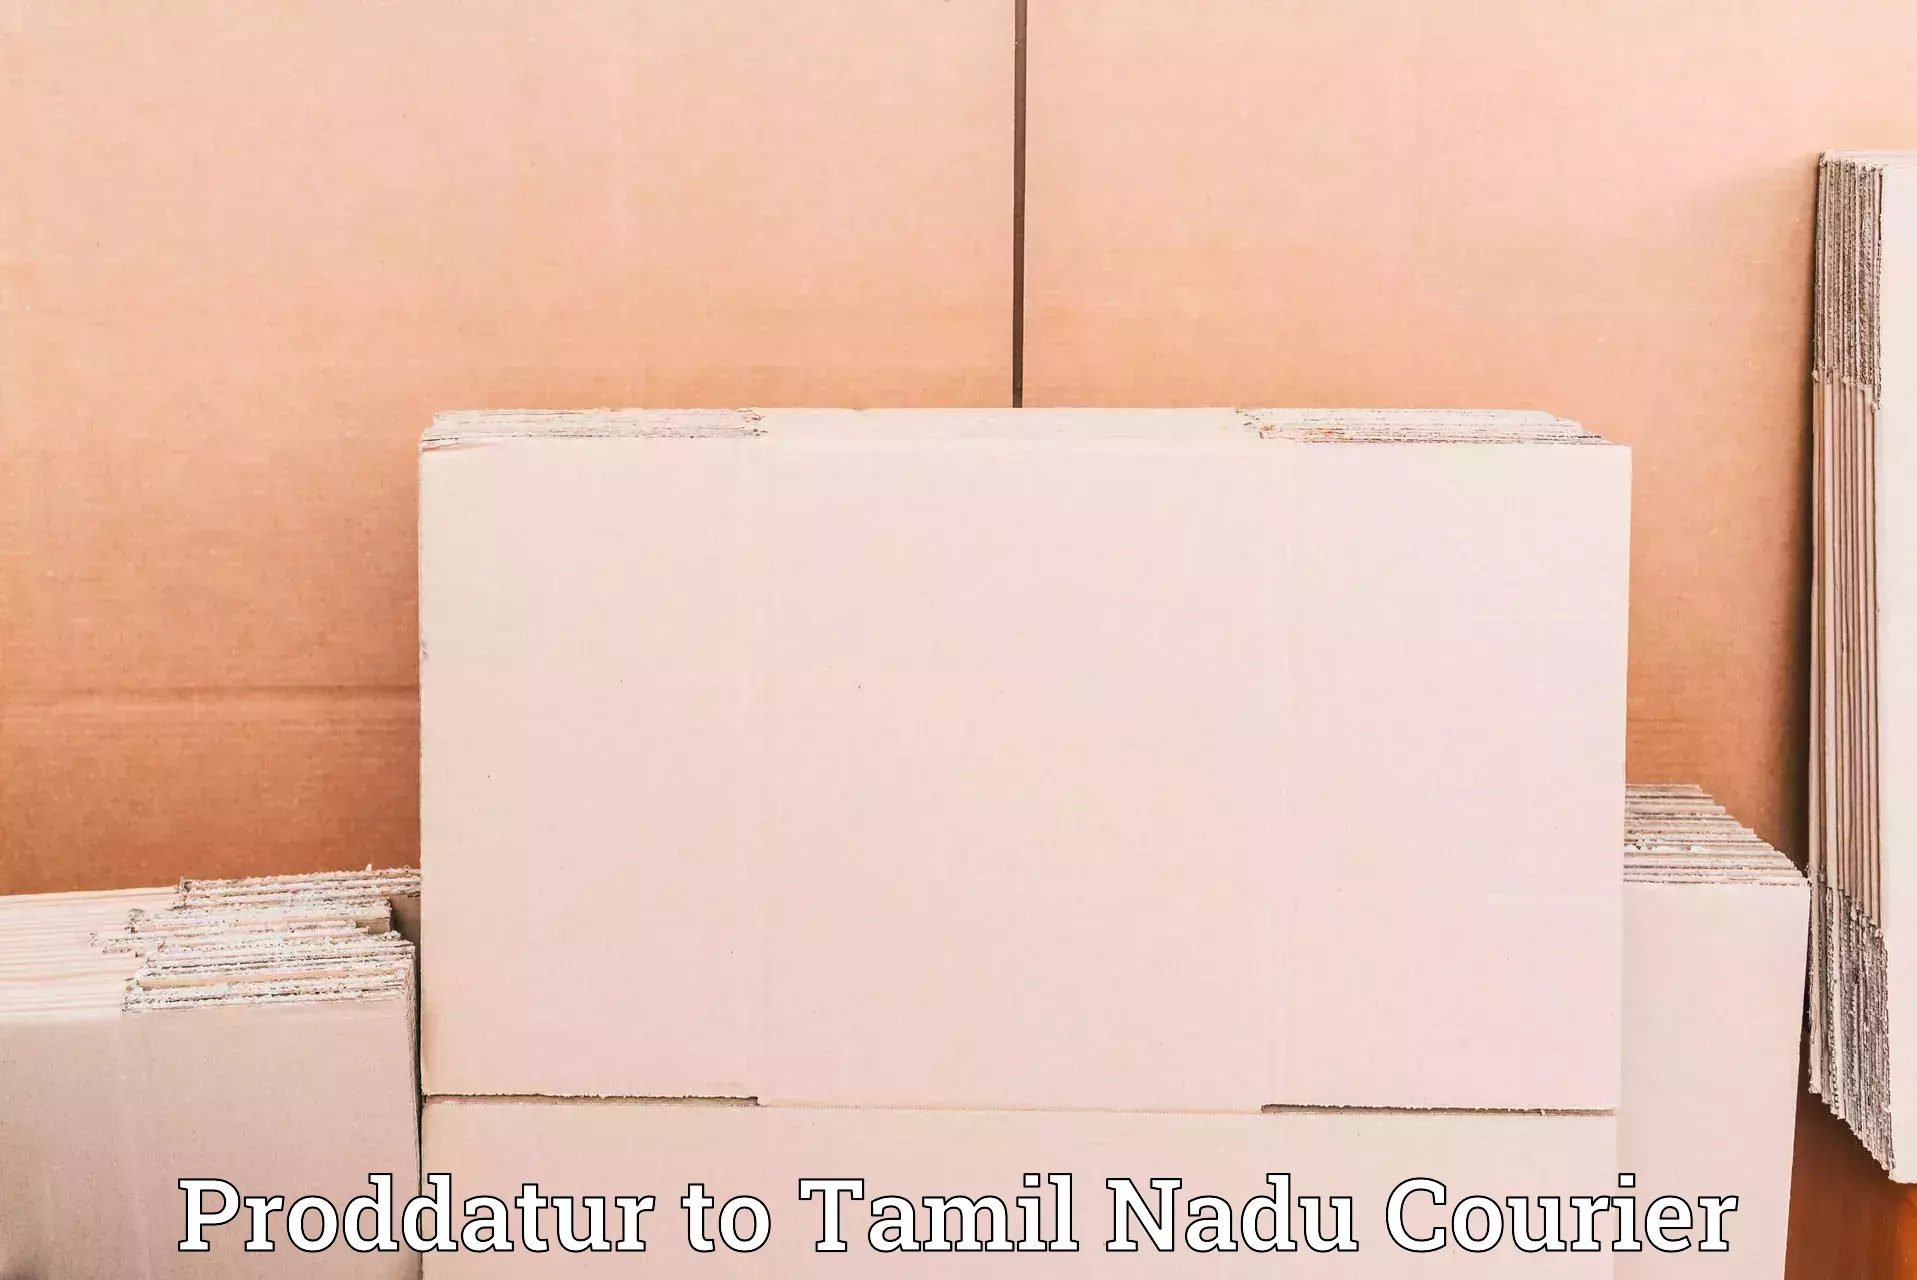 Reliable delivery network in Proddatur to Tamil Nadu